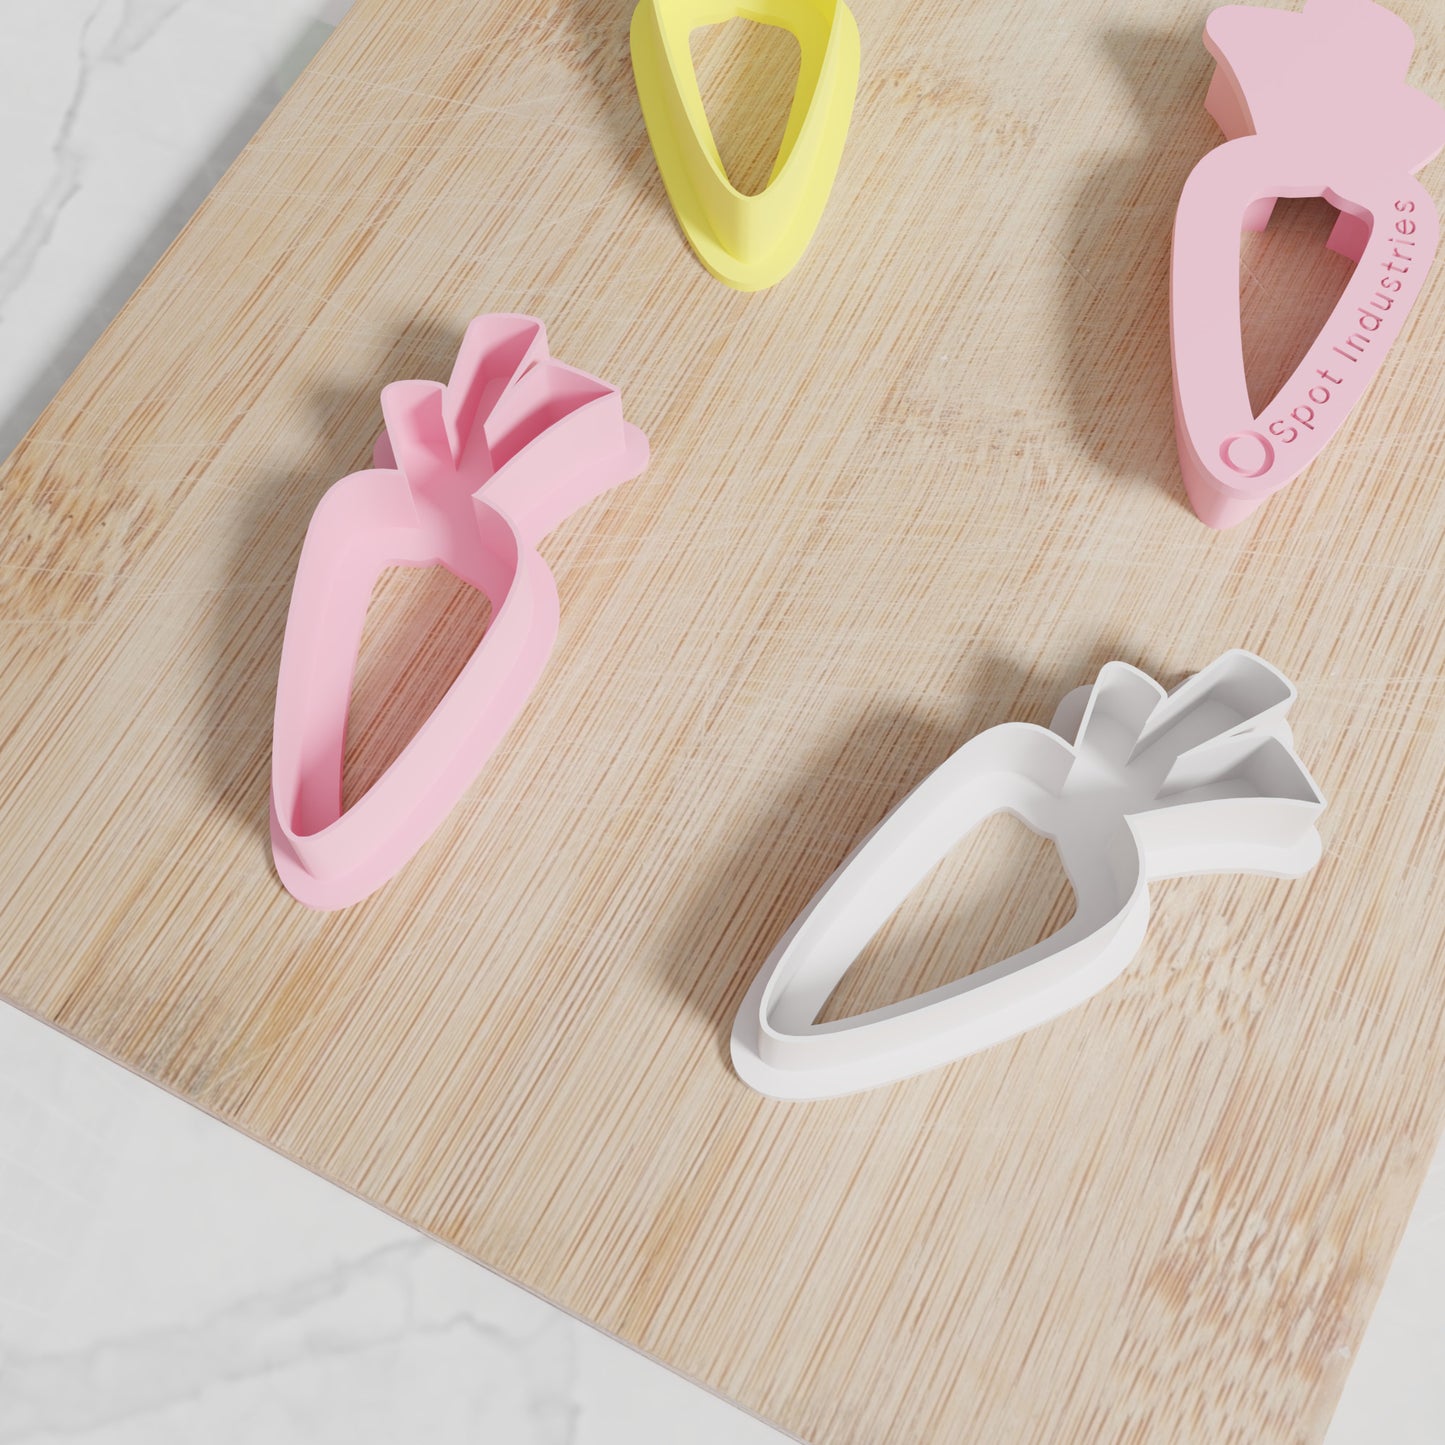 Easter Carrot Cookie Cutter Set. Matches Others In Our Easter Collection. Super Cute Easter Carrot Cookie Cutter